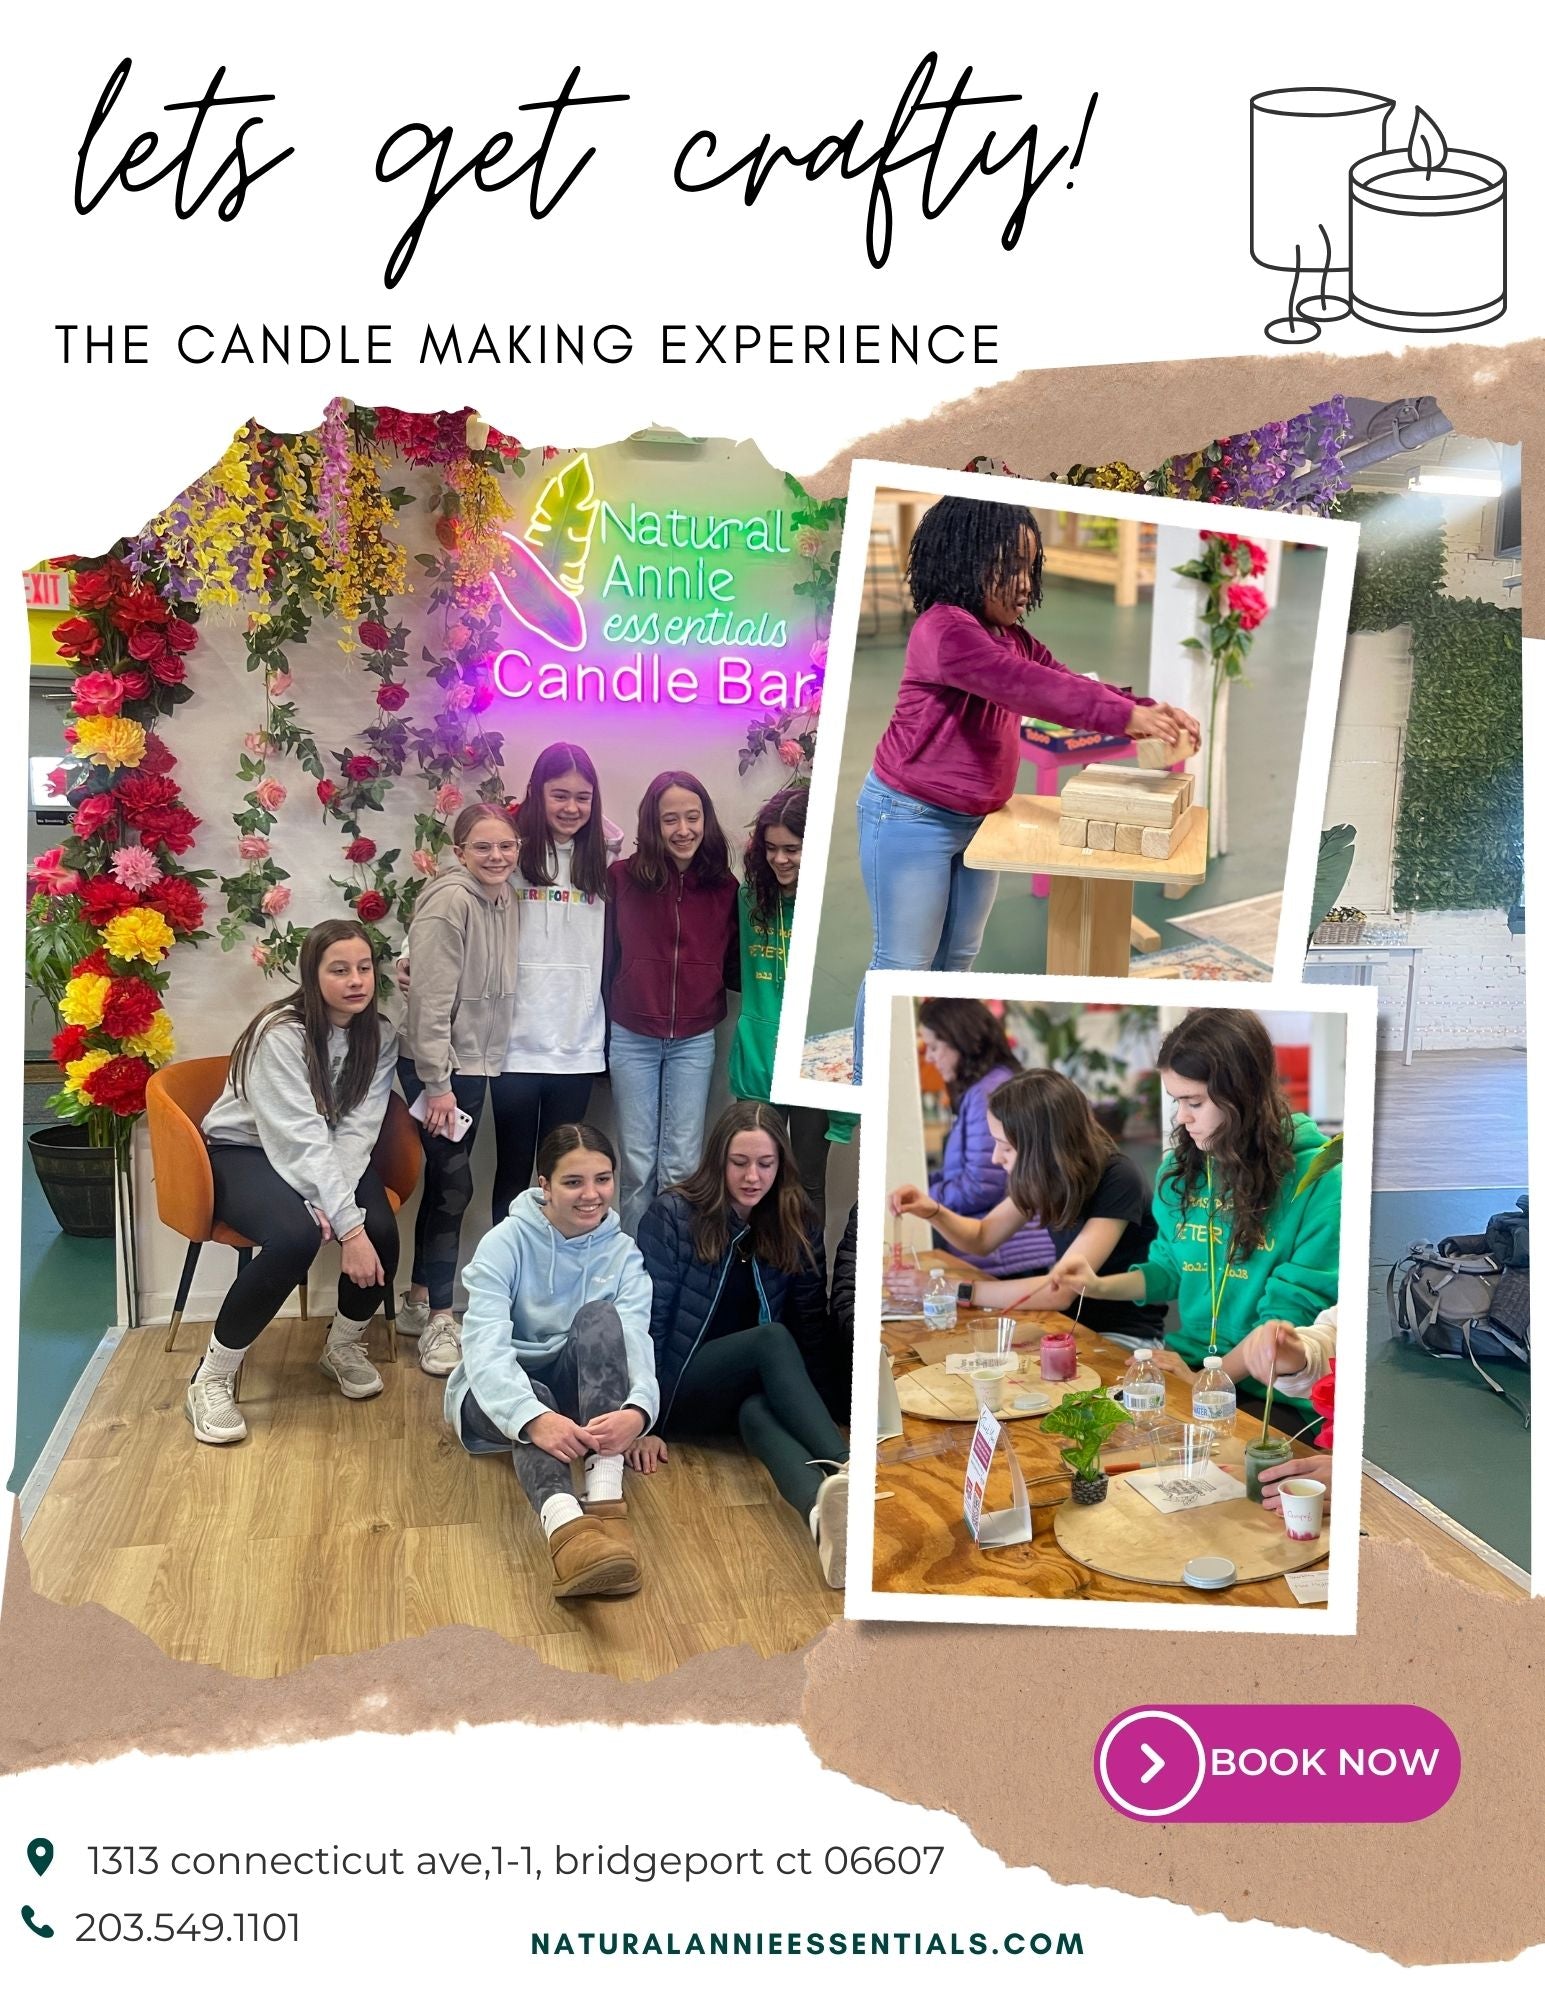 GIRL SCOUTS CANDLE MAKING EXPERIENCE